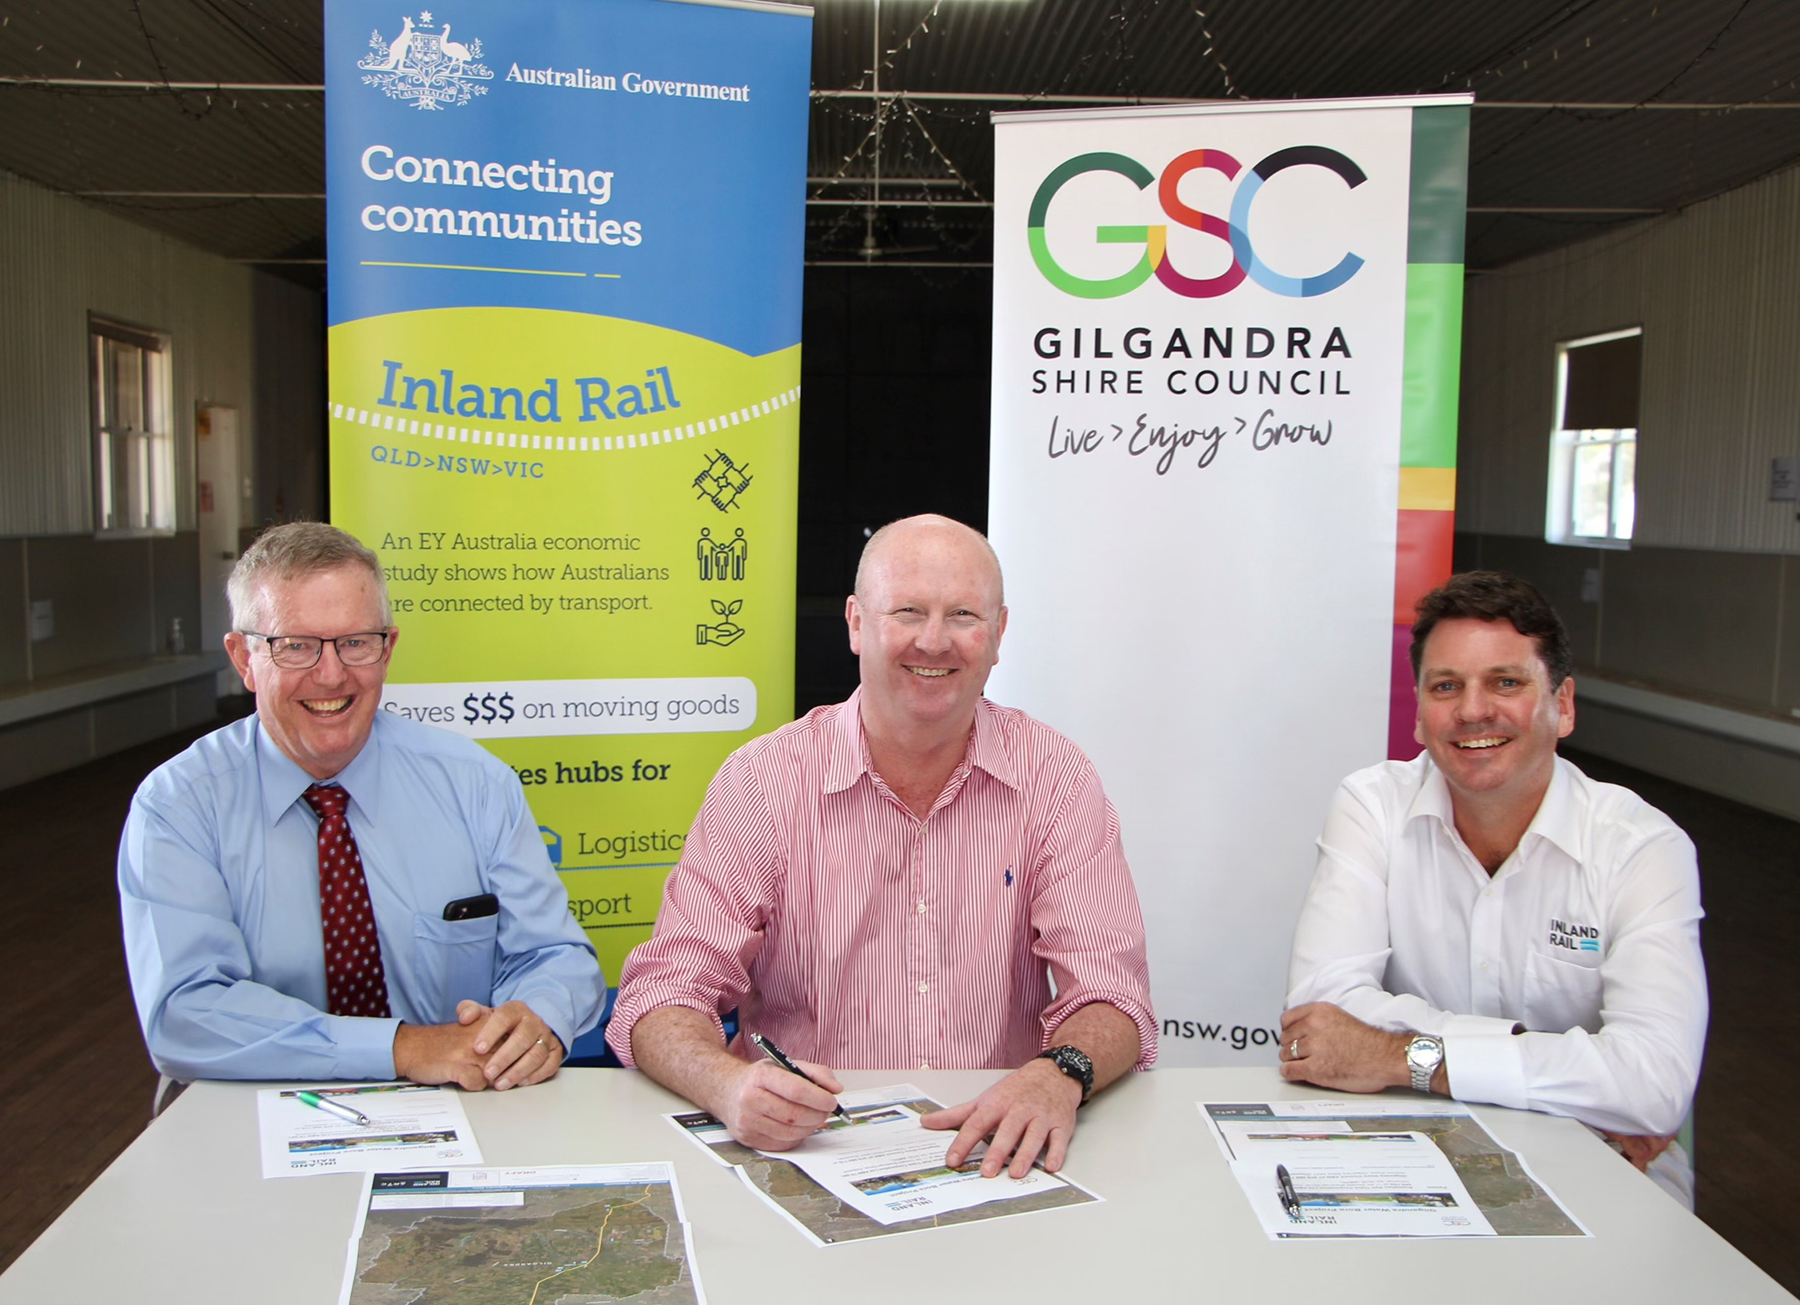 Member for Parkes Mark Coulton, Gilgandra Shire Council Acting Mayor Ash Walker and Inland Rail Project Director (Narromine to Narrabri) Duncan Mitchell